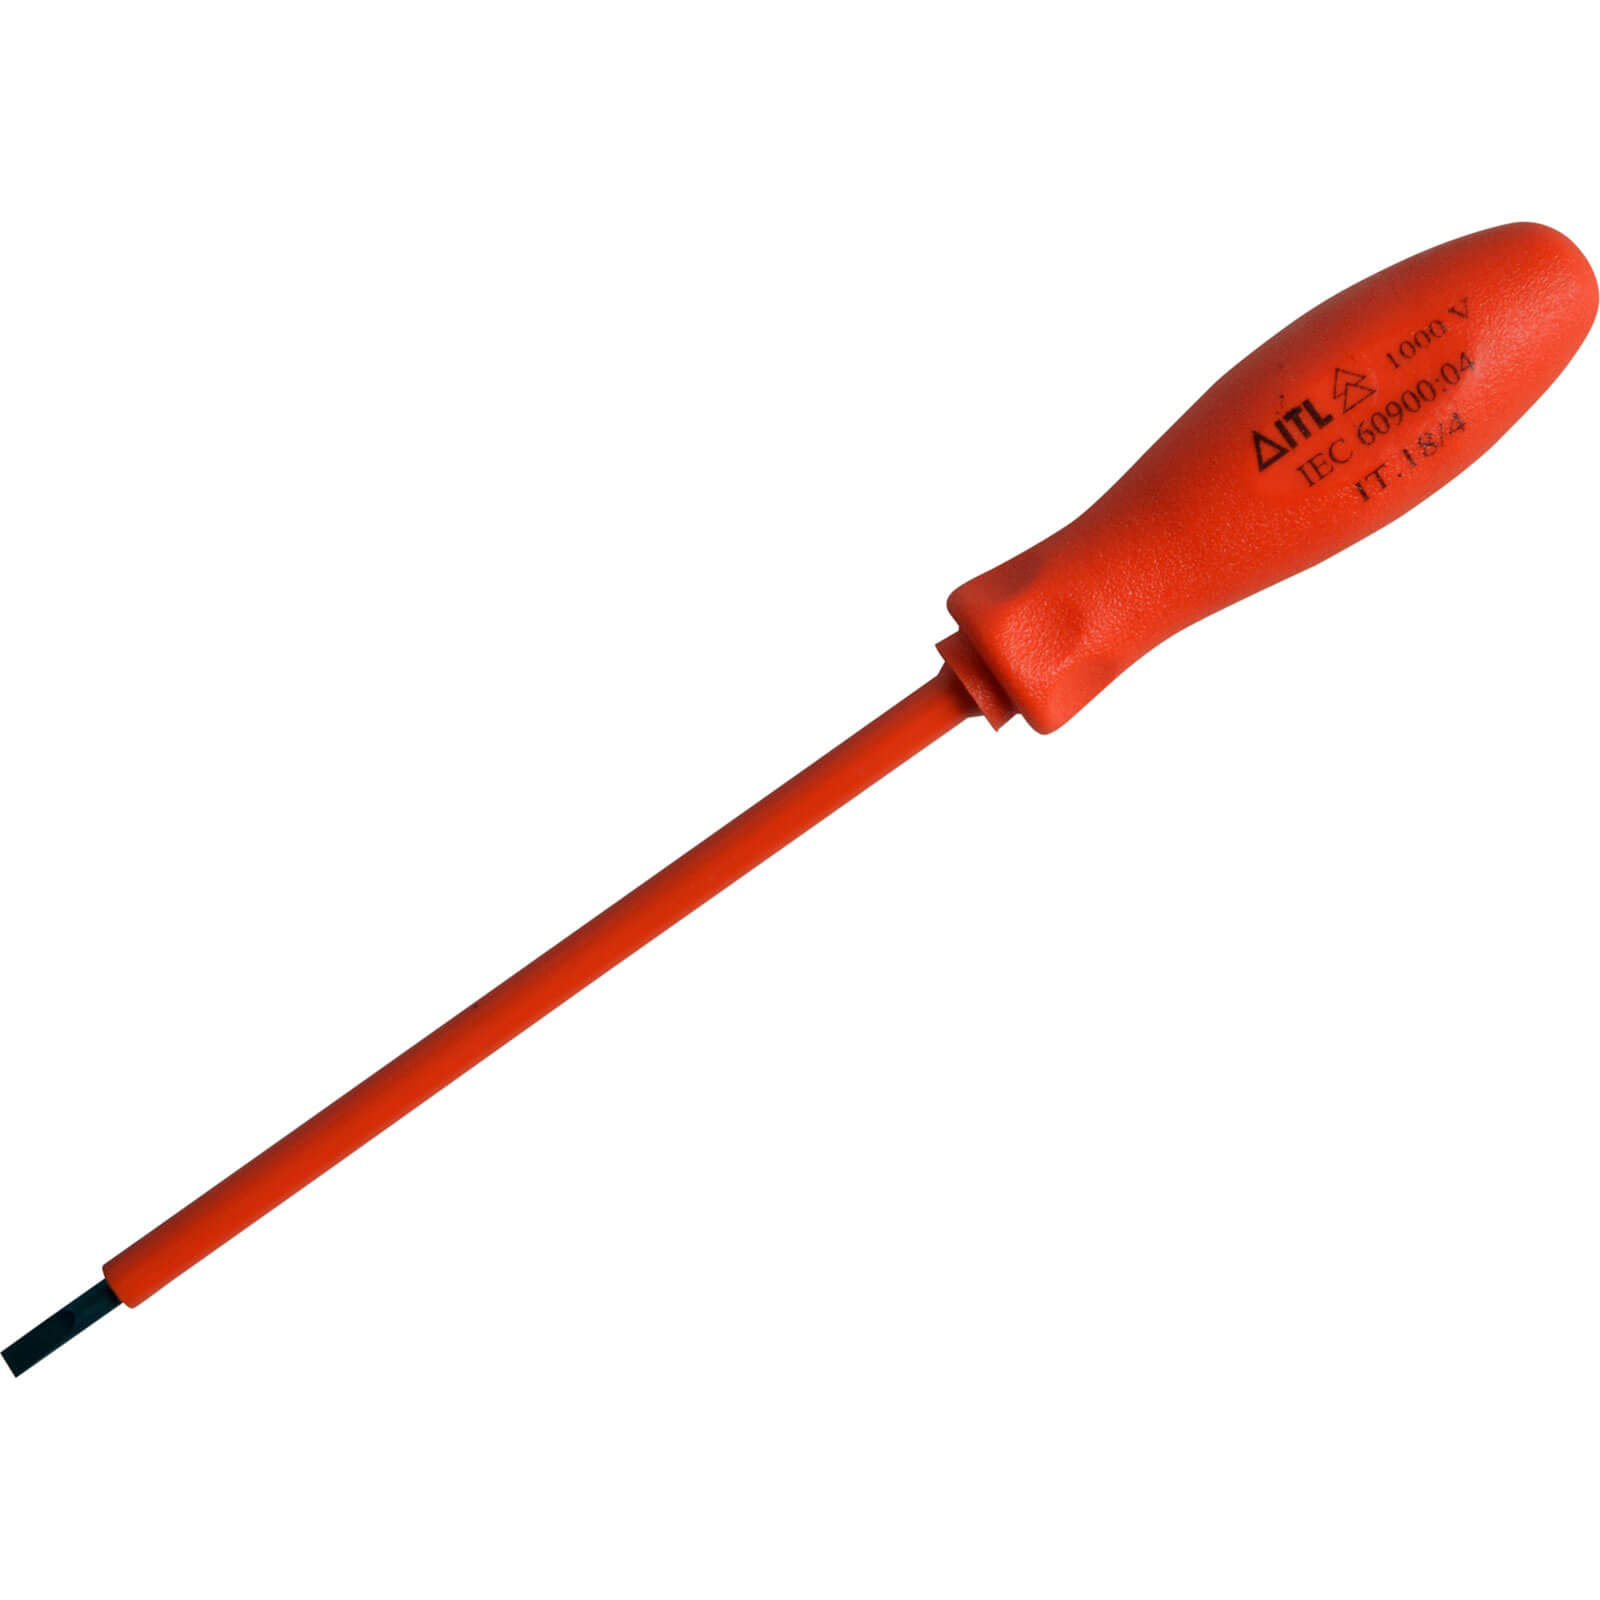 Photo of Itl Insulated Parallel Slotted Terminal Screwdriver 3mm 100mm